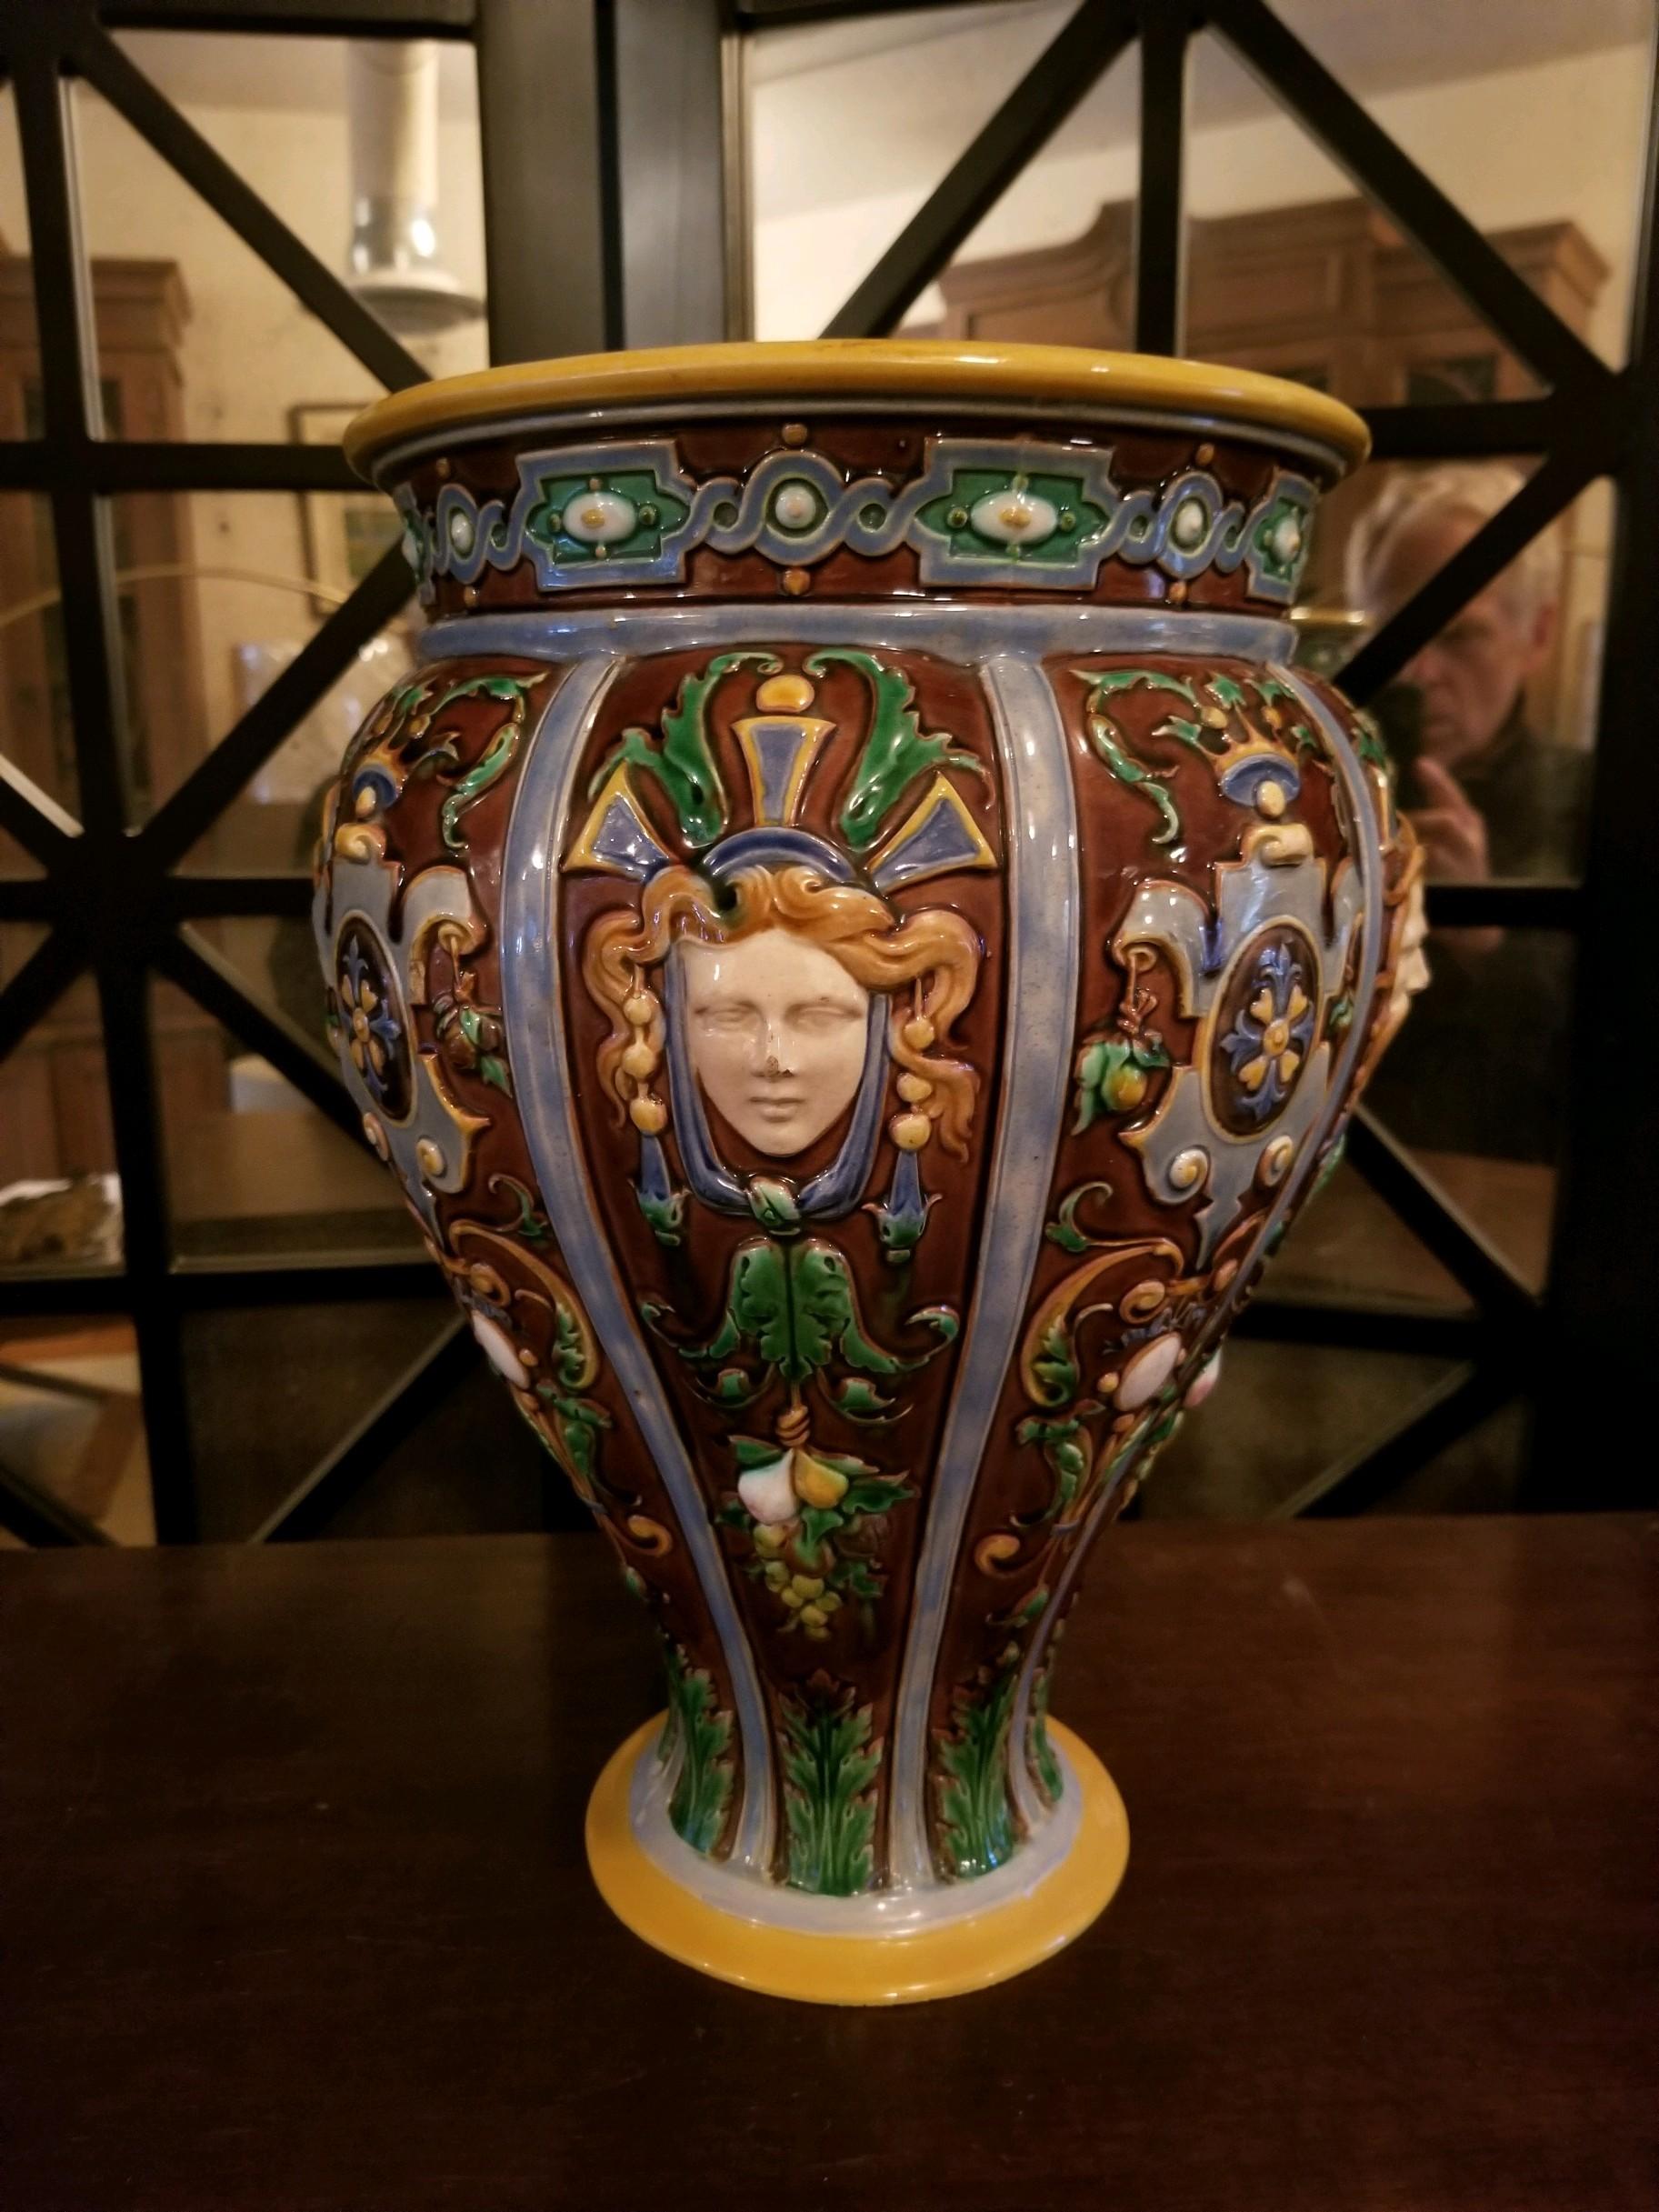 
Minton Majolica jardinière (large vase) of Roman inspiration. Beautifully detailed and colored. Small stress crack at top probably a kiln issue, does not affect value or stability. It is washed in the Classic blue interior. 14” tall by 9” wide